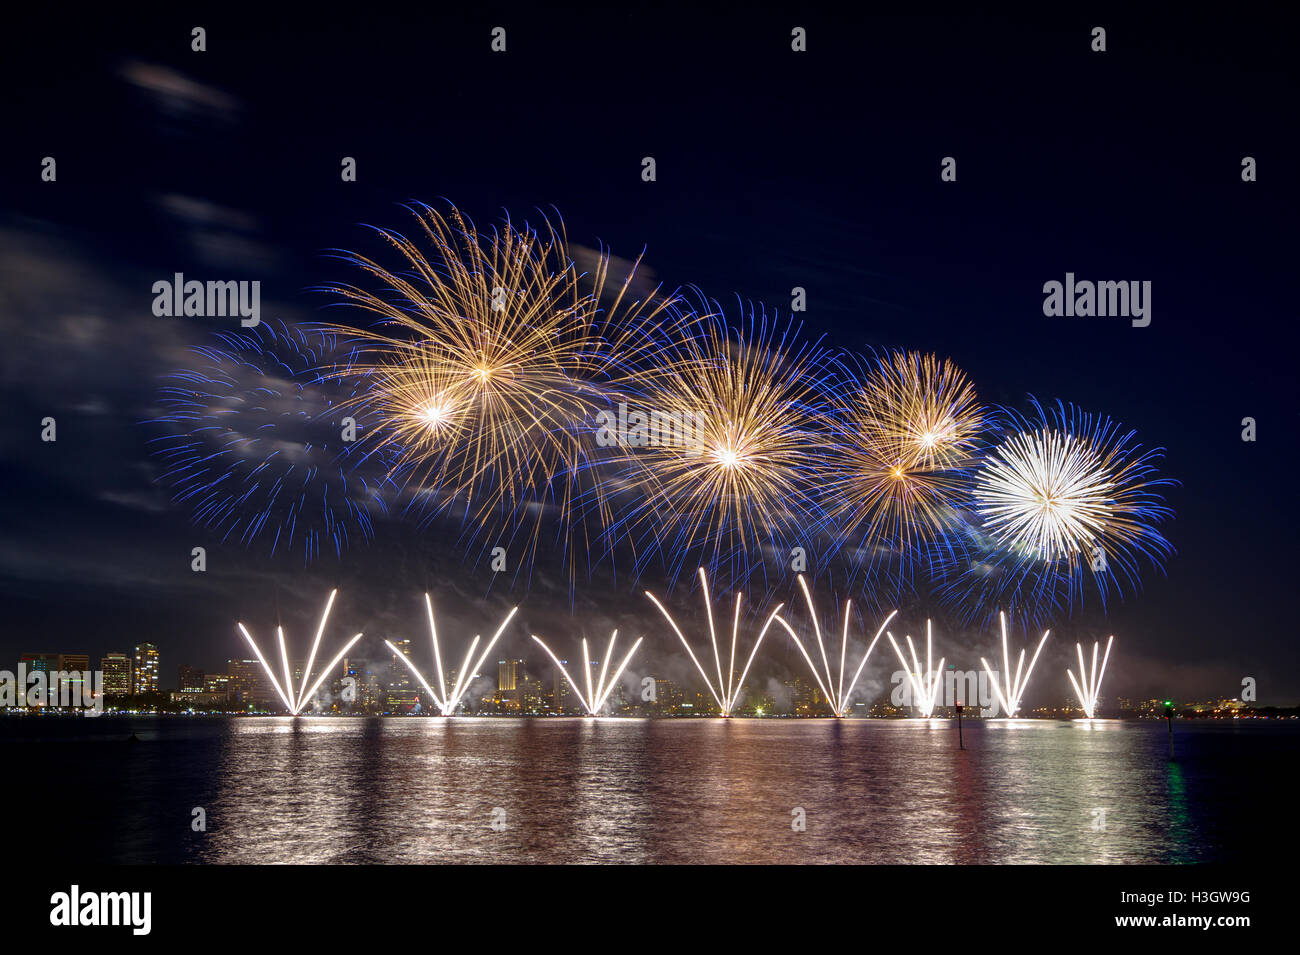 Australia Day Fireworks, Perth, Western Australia. The fireworks held in Perth are the largest Australia Day display. Stock Photo